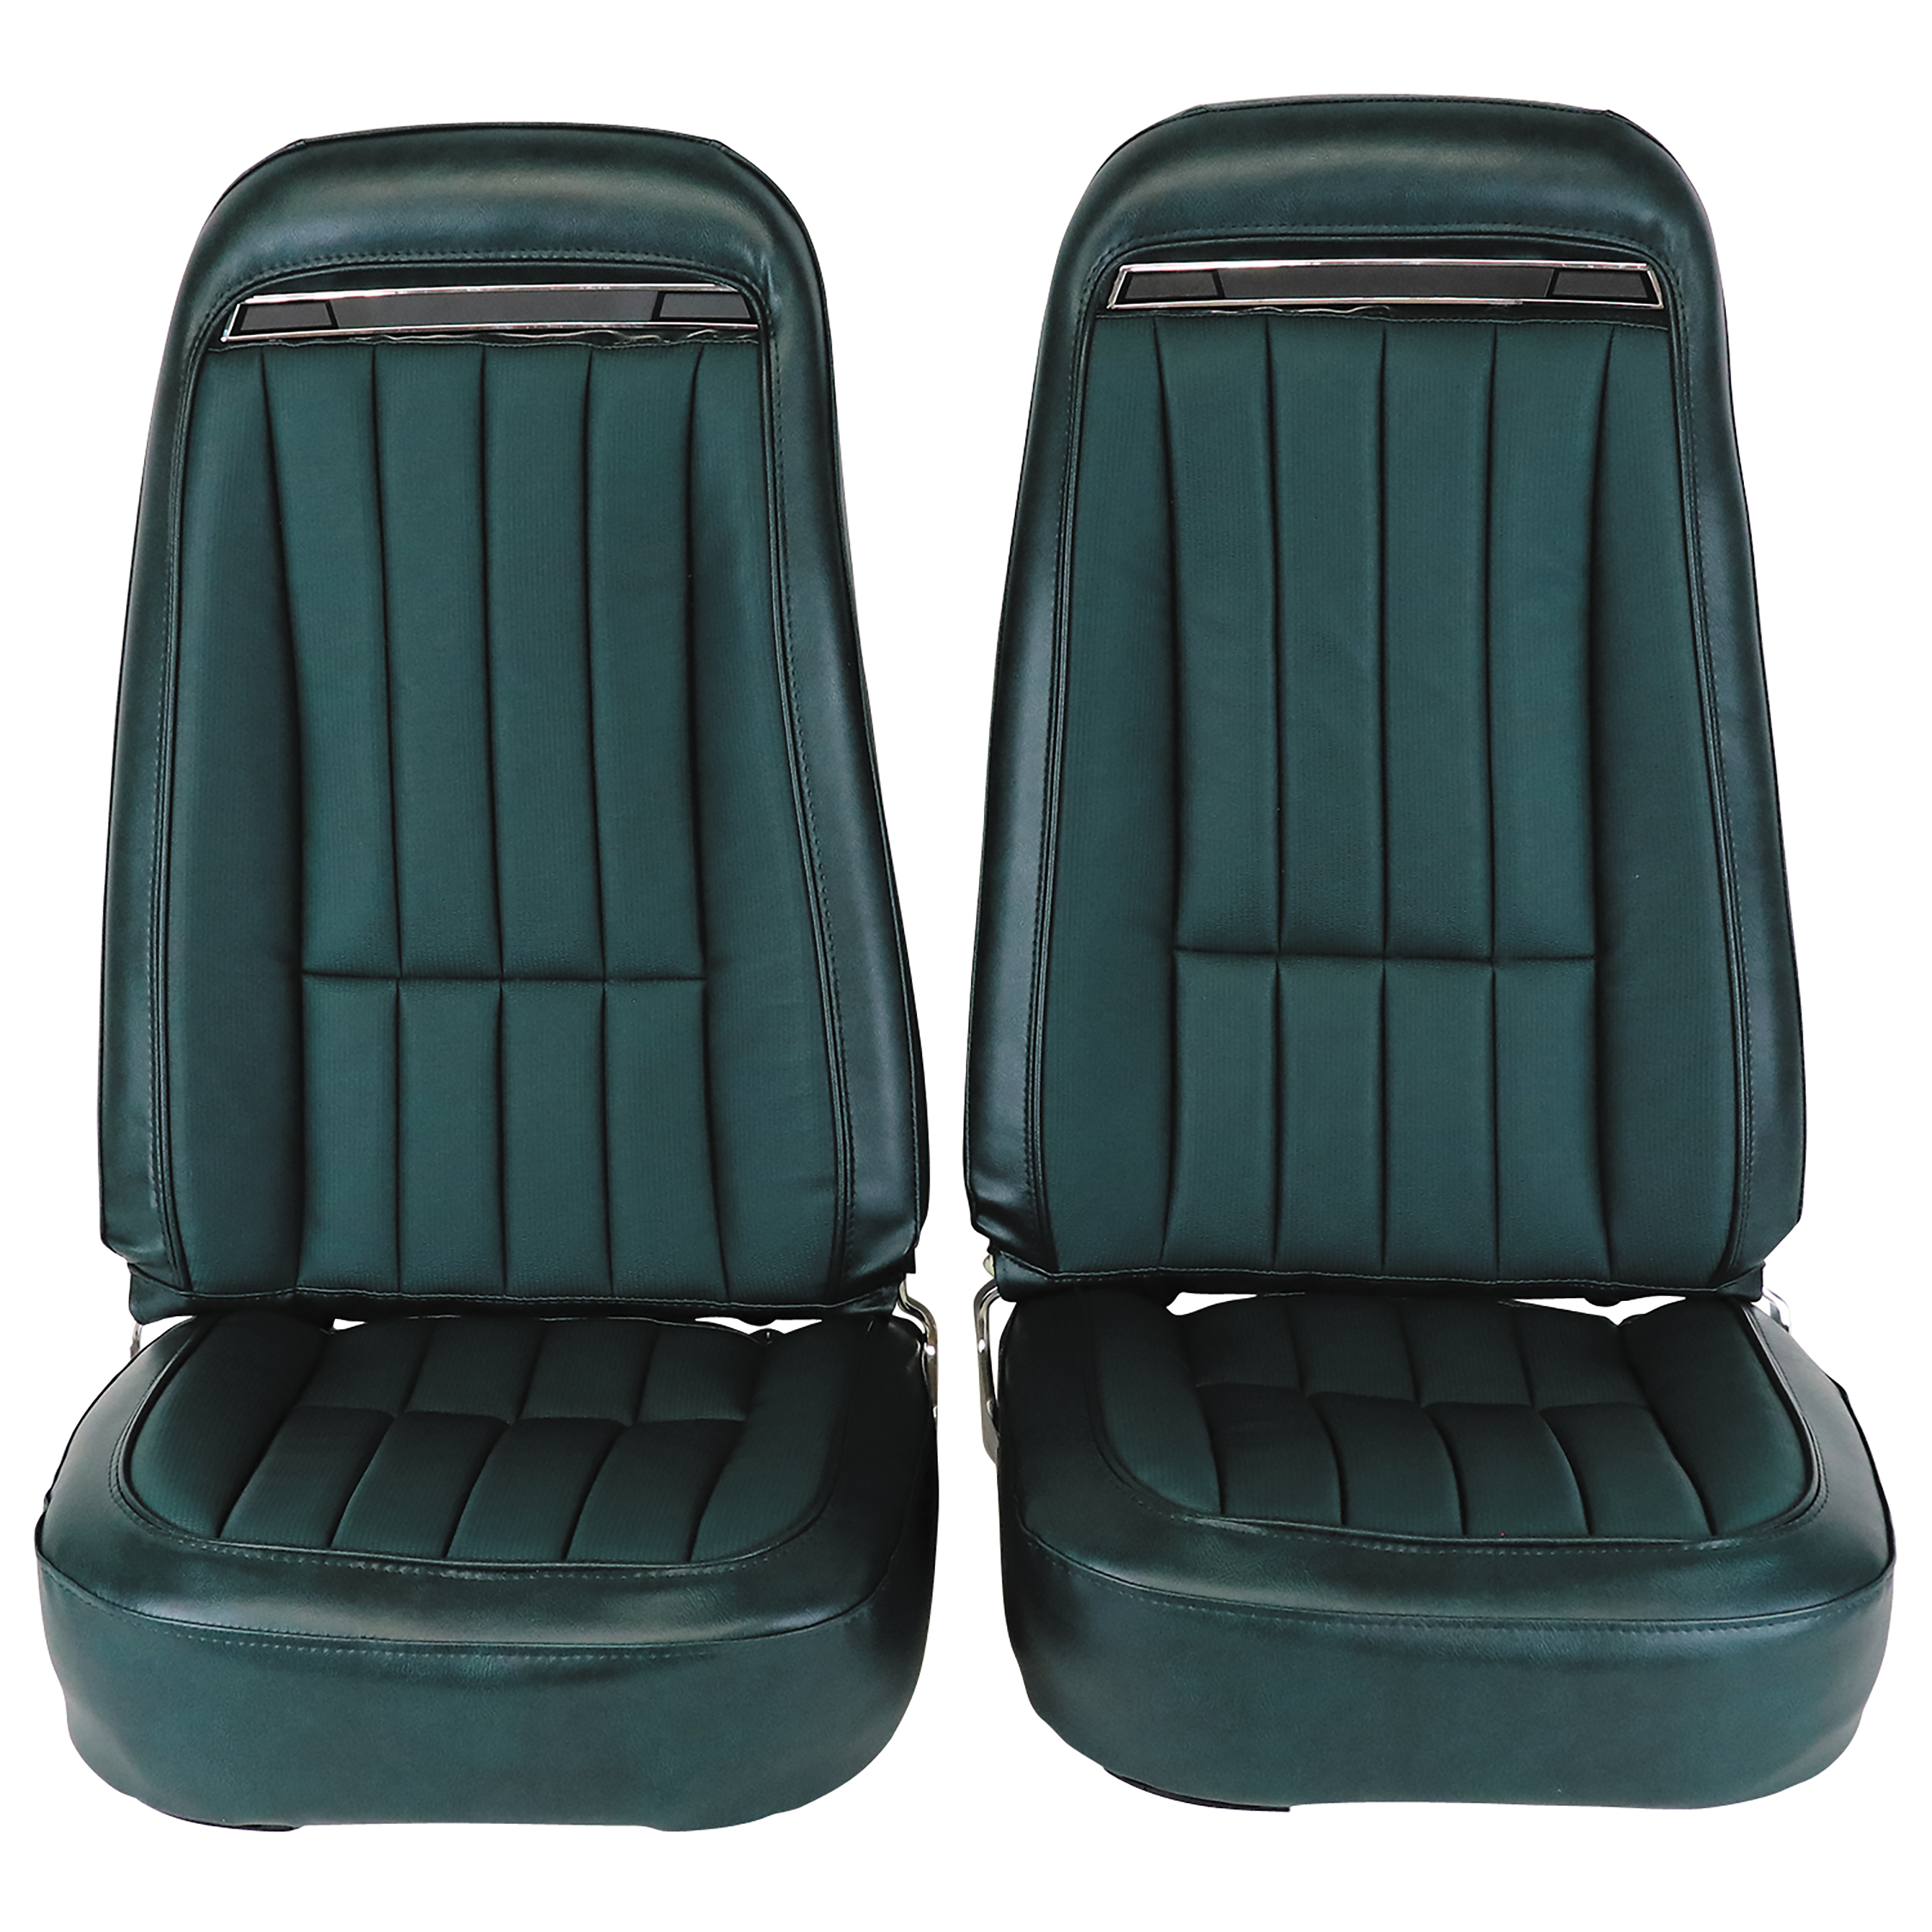 1971 C3 Corvette Mounted Seats Green Vinyl Without Shoulder Harness